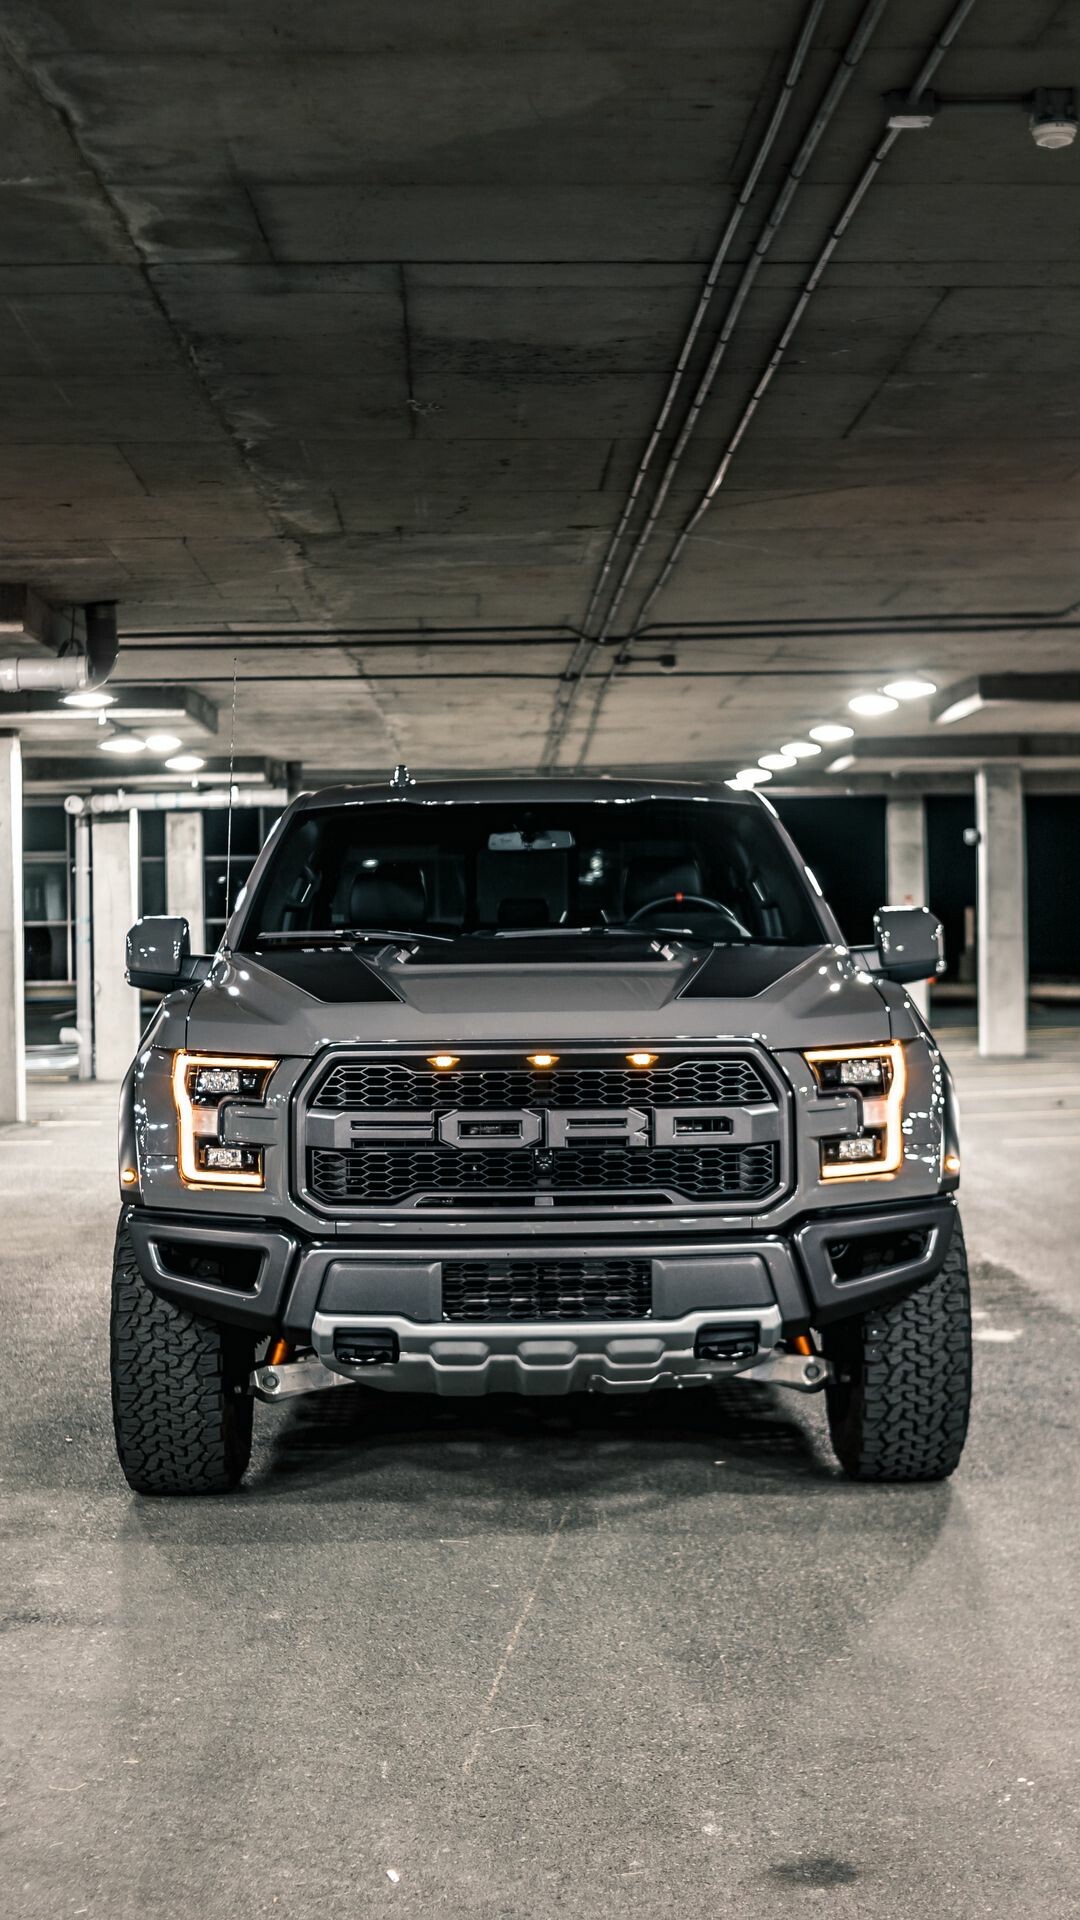 Ford: F150, Pickup truck, Has been the best-selling vehicle in the U.S. for more than three decades. 1080x1920 Full HD Background.